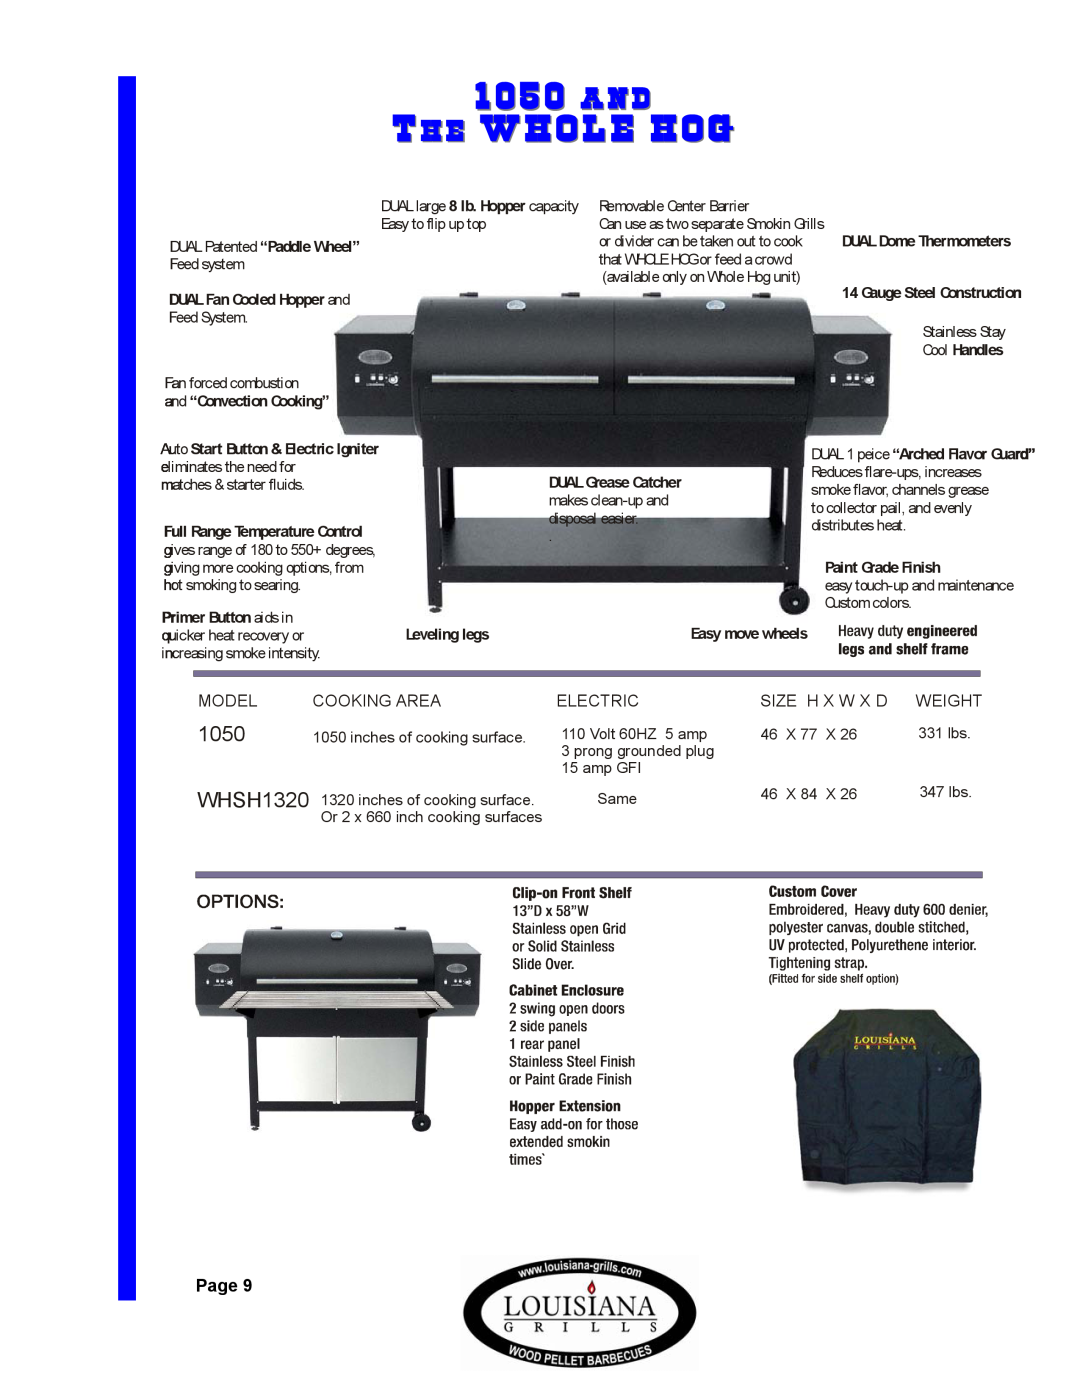 Dansons Group 1050 And The Whole Hog, Page, Cool Handles, Auto Start Button & Electric Igniter eliminates the need for 